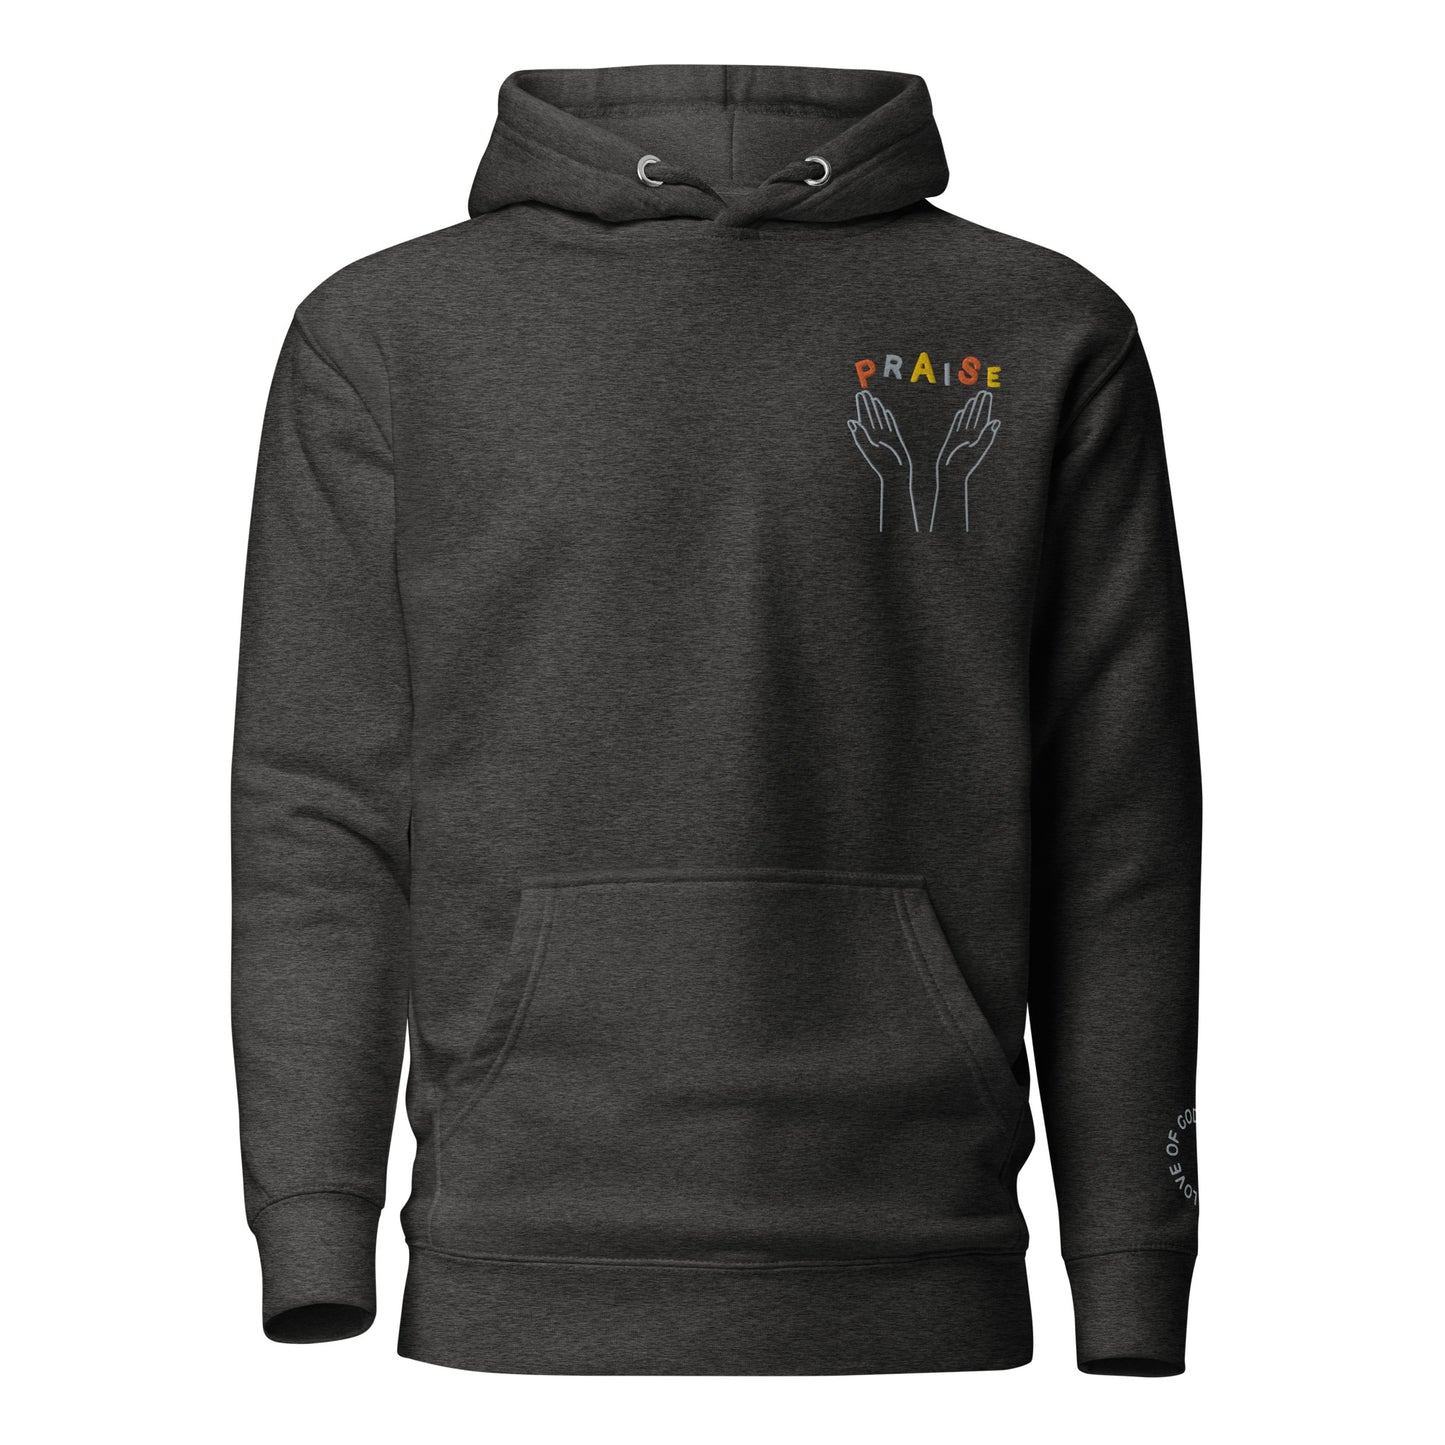 Praise Hands Unisex Hoodie - Charcoal Heather / S - Shirts &